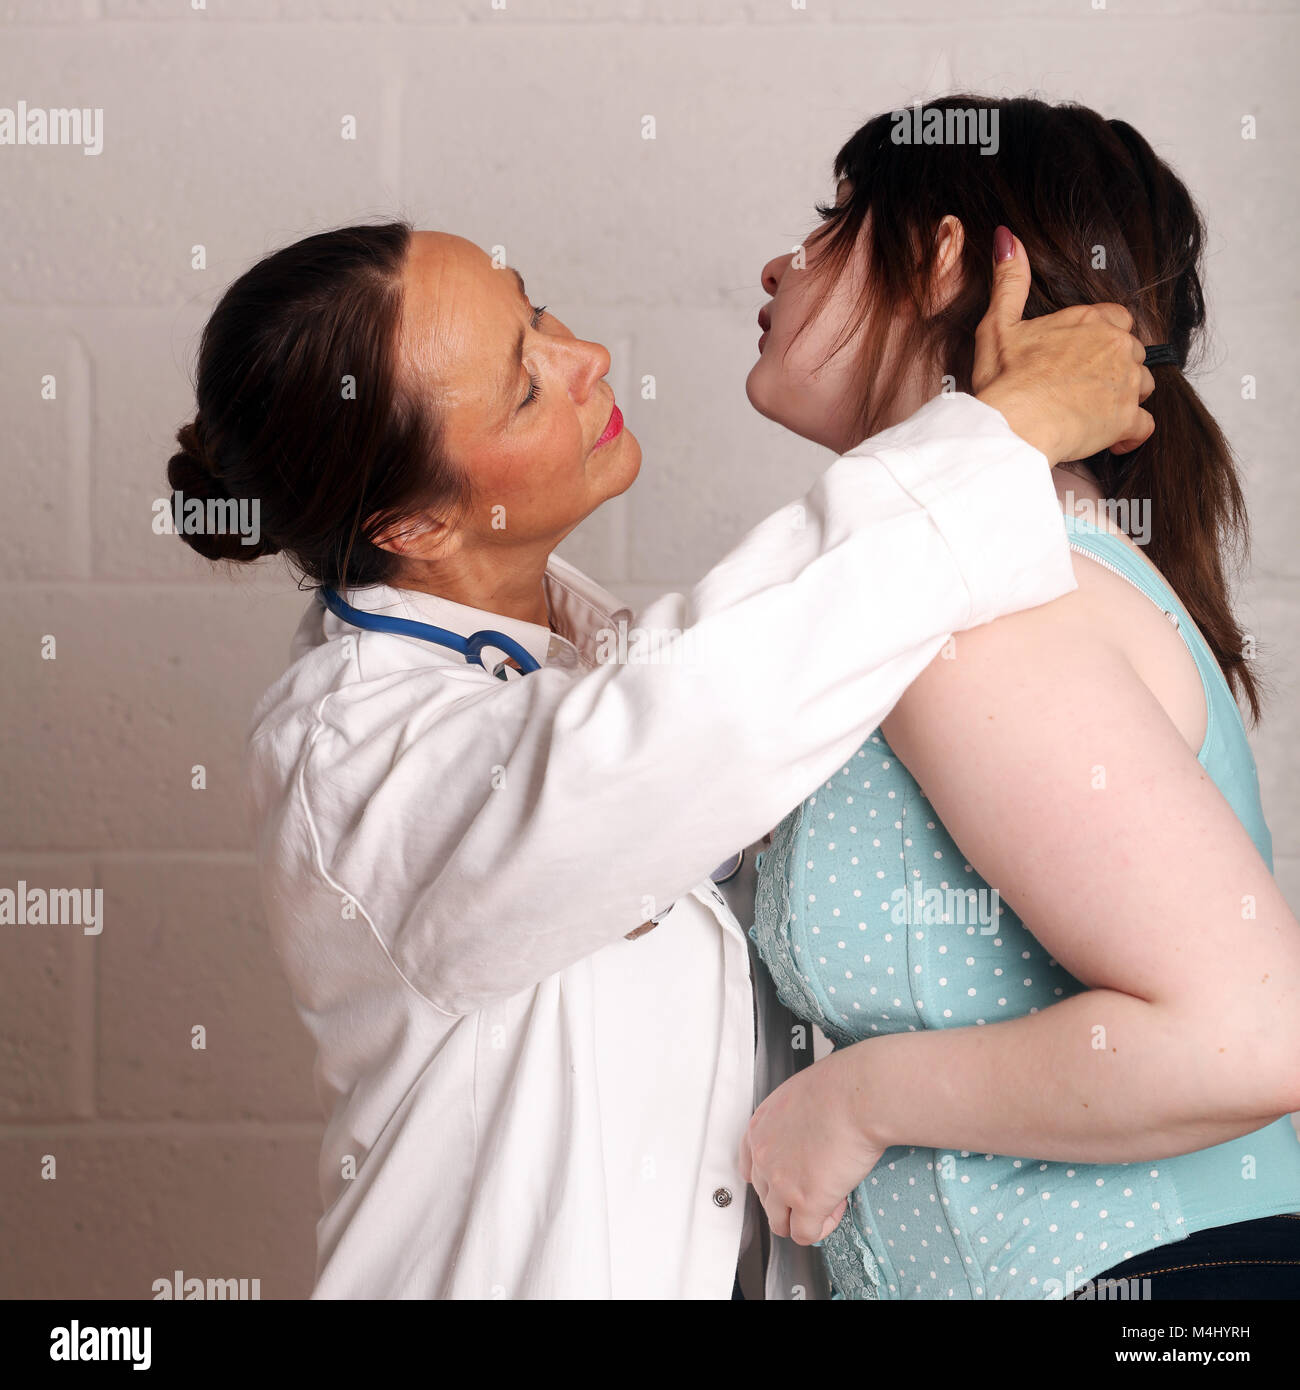 August 2017 - A young woman and a small mature doctor together. Stock Photo